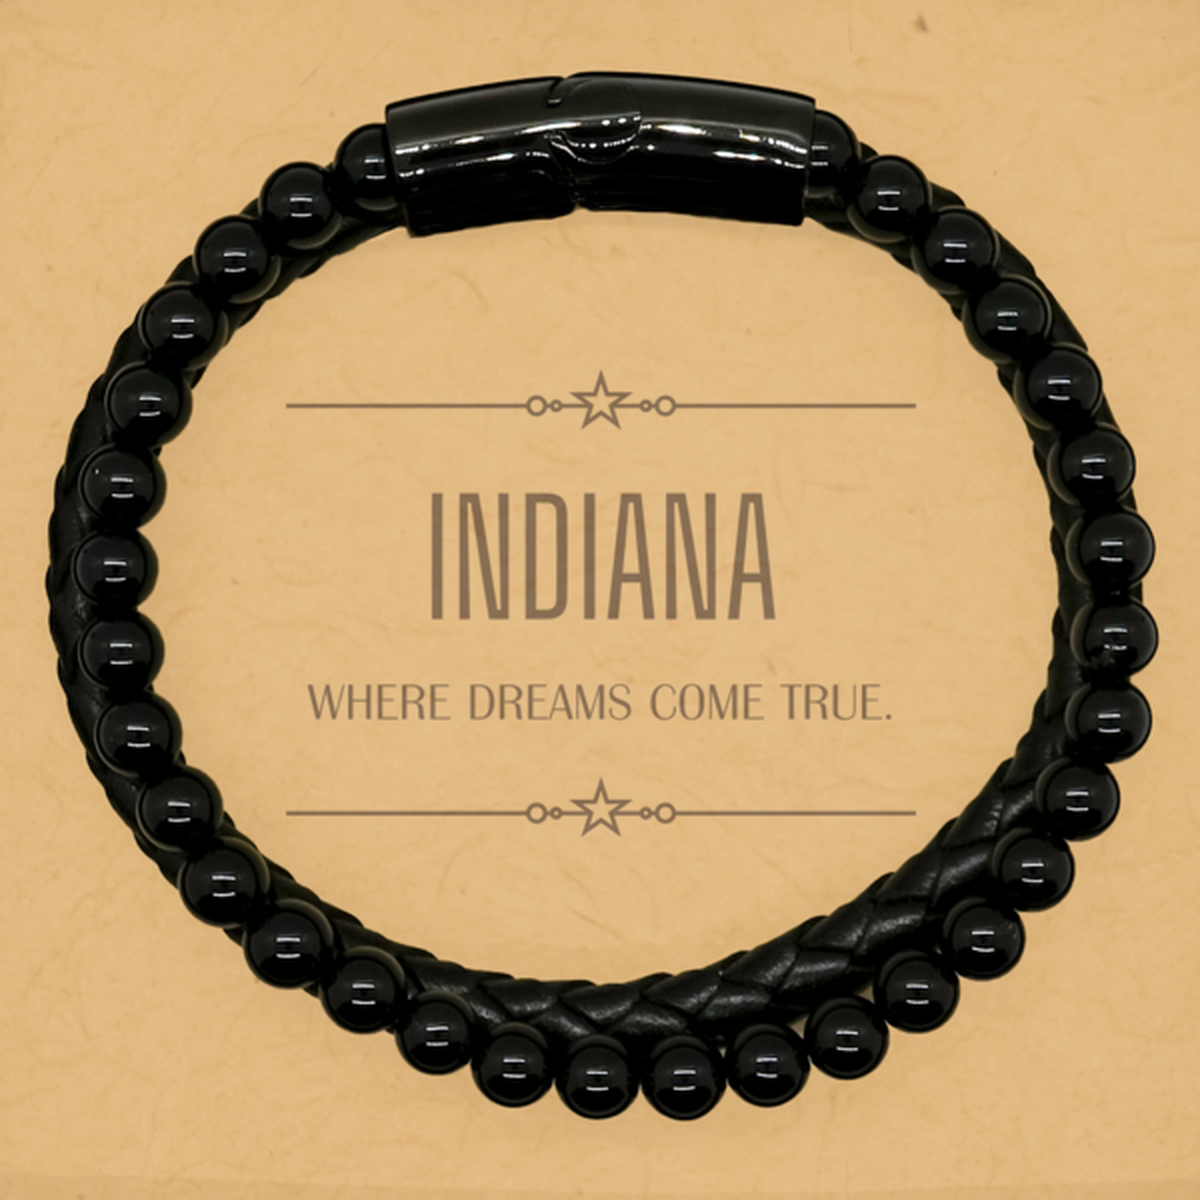 Love Indiana State Stone Leather Bracelets, Indiana Where dreams come true, Birthday Inspirational Gifts For Indiana Men, Women, Friends